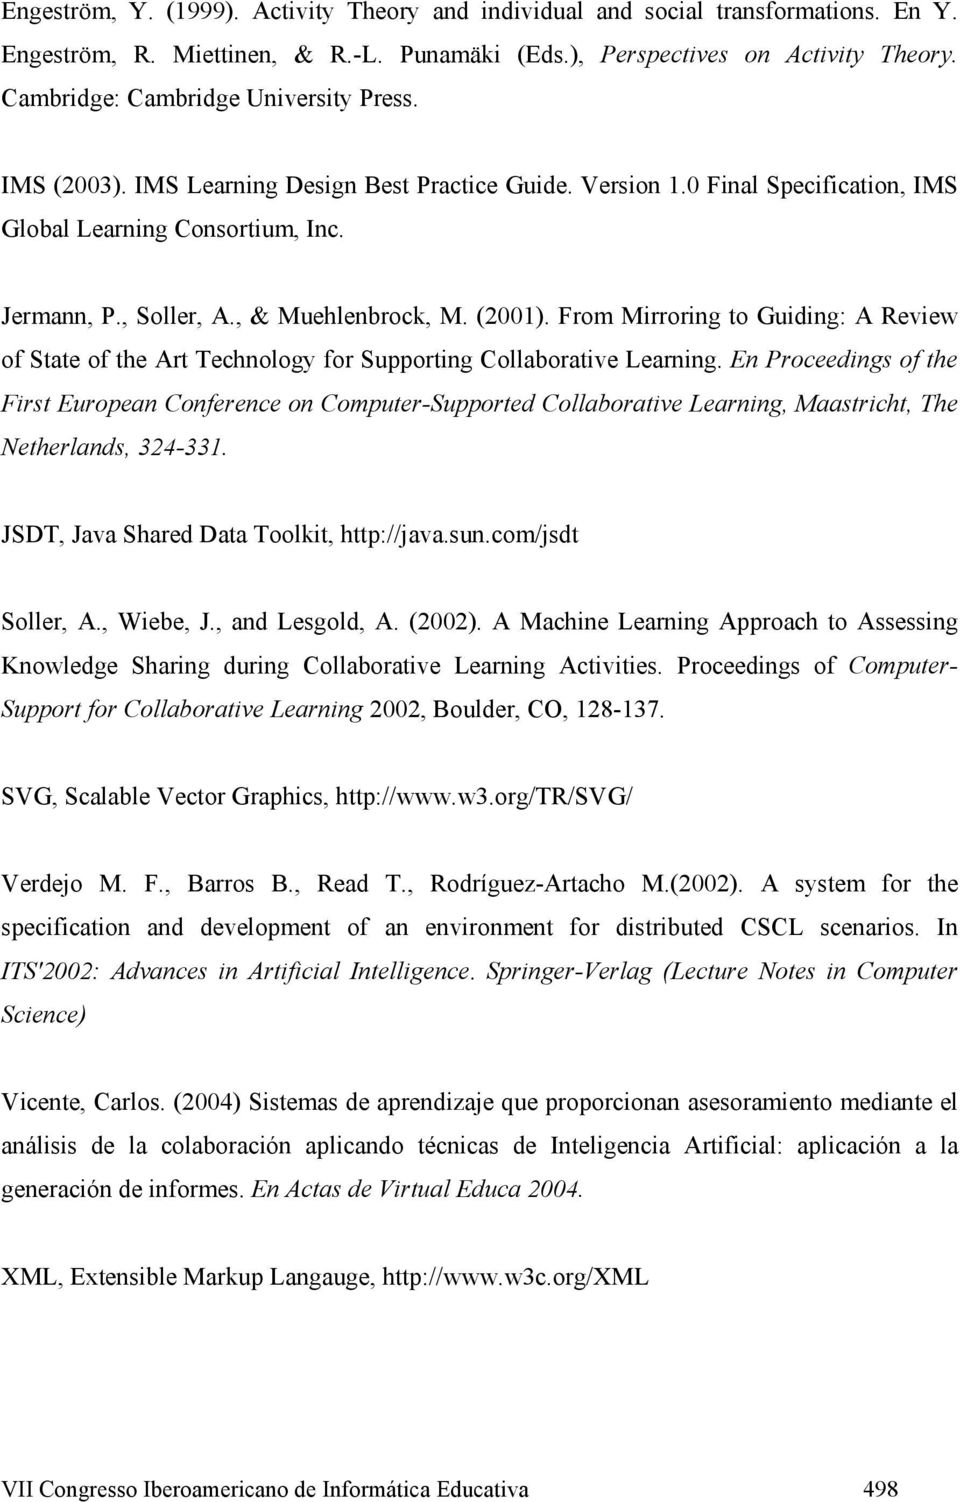 , & Muehlenbrock, M. (2001). From Mirroring to Guiding: A Review of State of the Art Technology for Supporting Collaborative Learning.